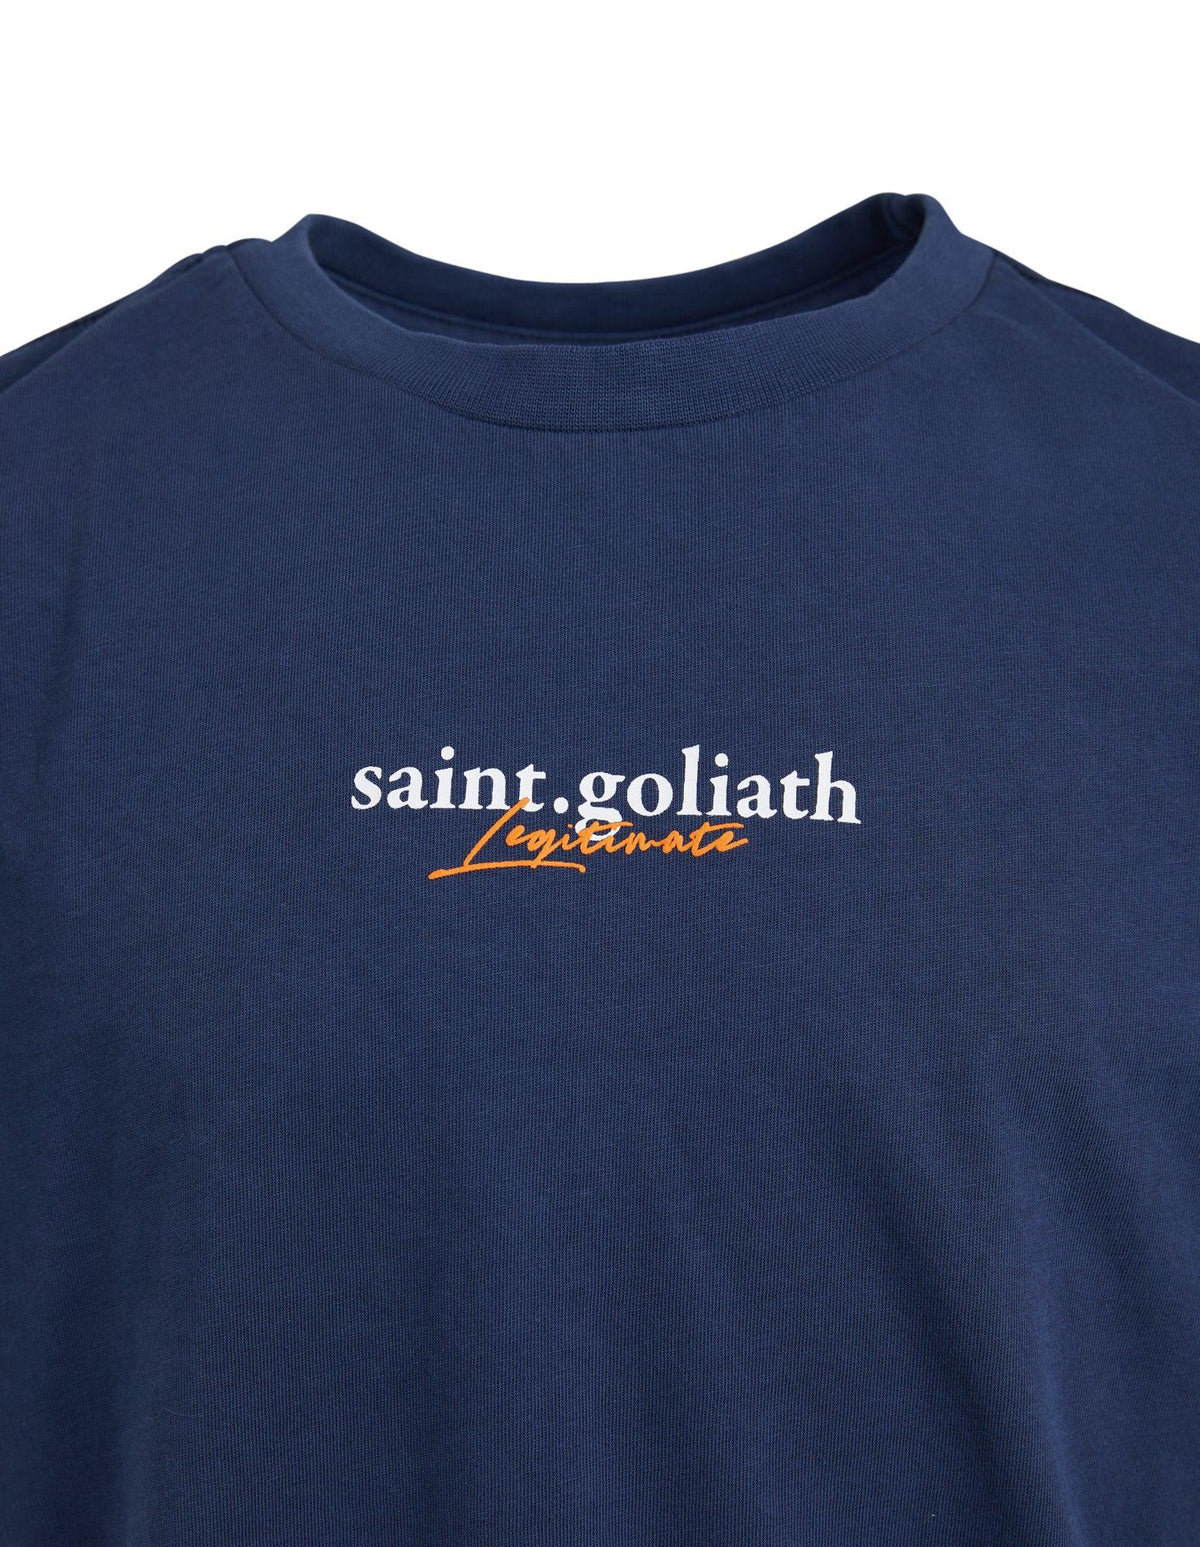 St Goliath 3-7-Kids Lethal Tee Navy-Edge Clothing